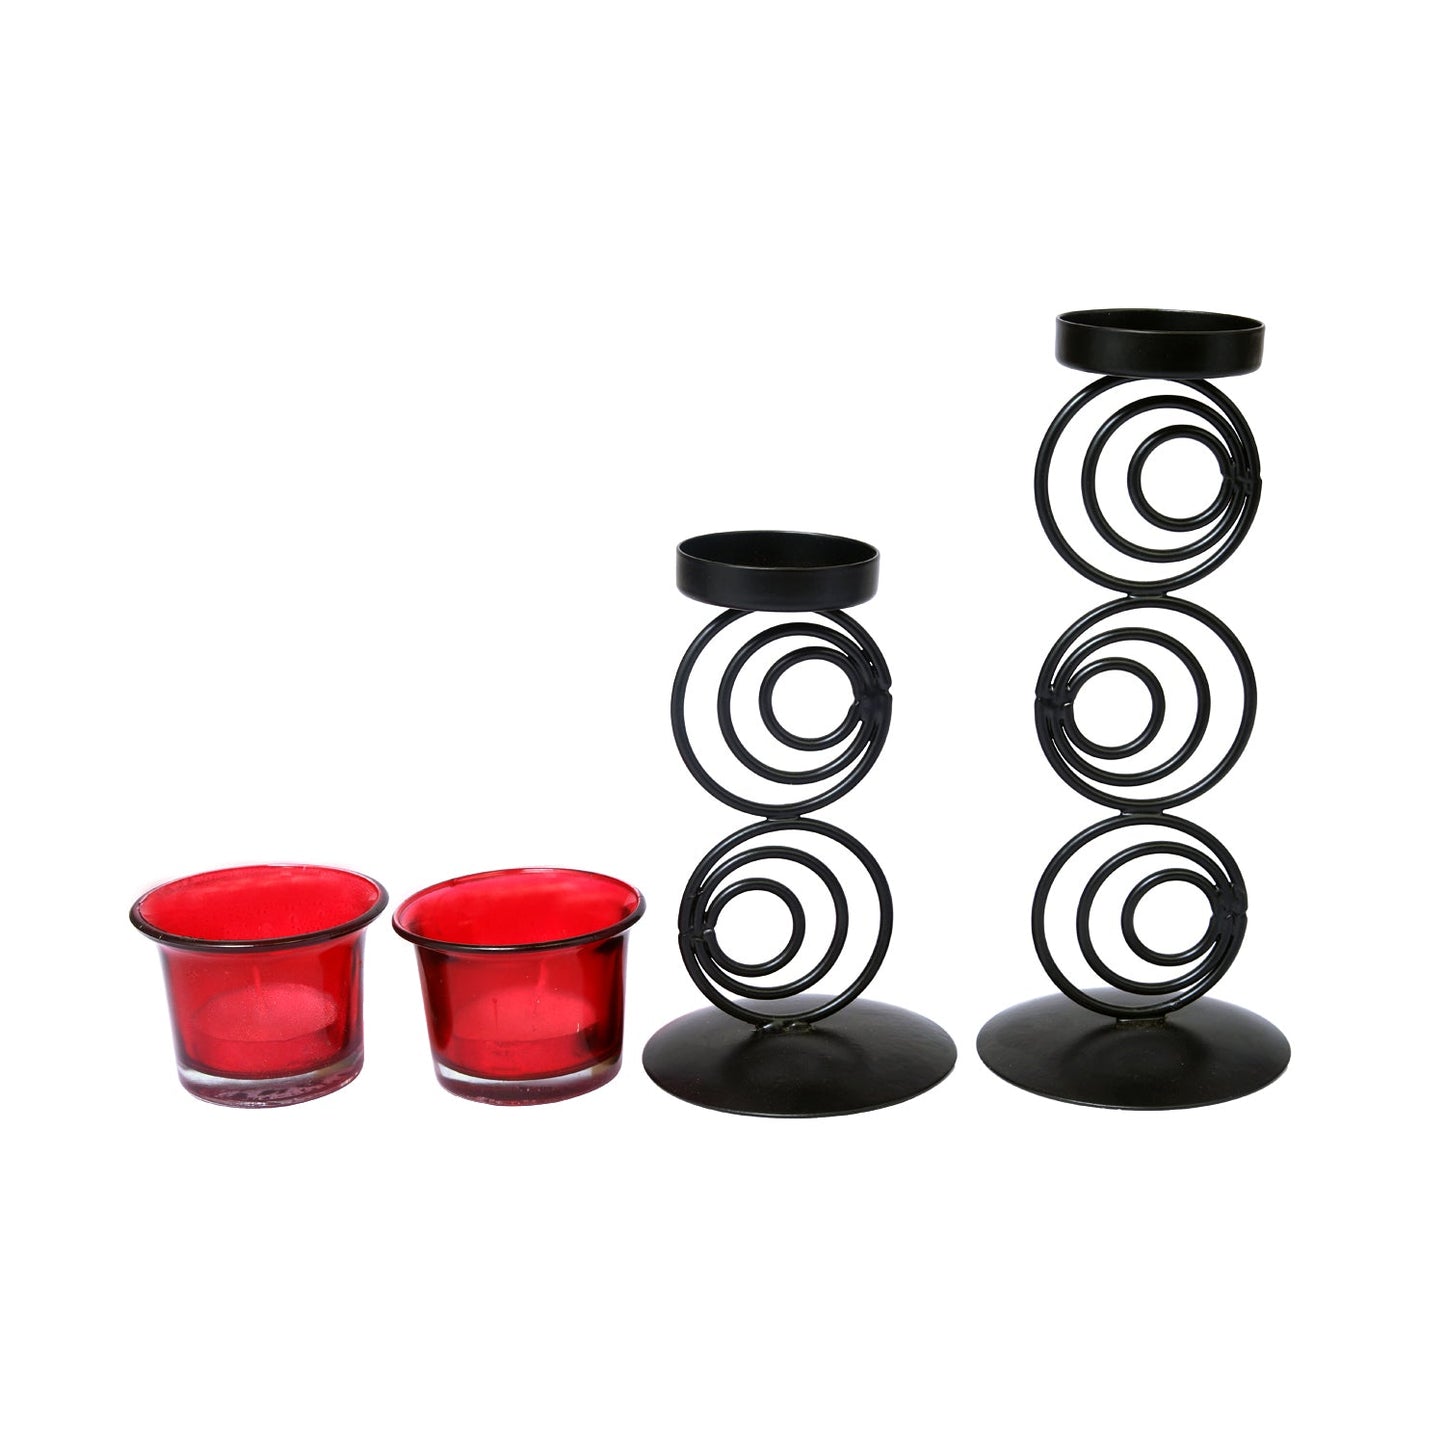 Hosley Black powdercoated Metal Candle Holders with 2 Red Glass for Home Decoration Dinning Table Decoration Candle Wedding Décor, Pack of 2